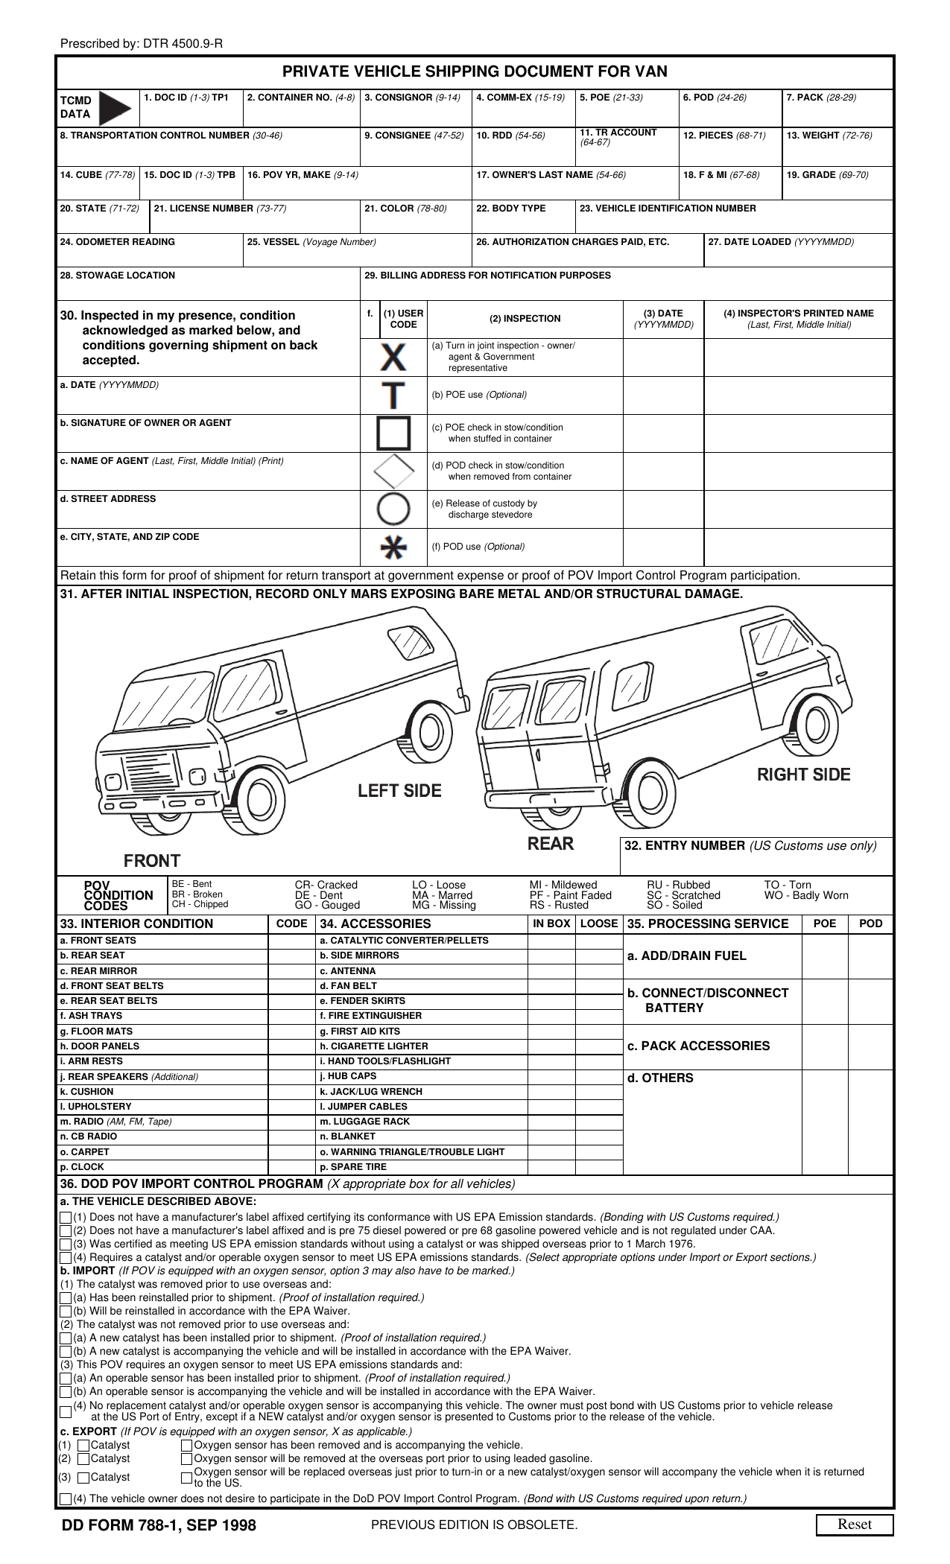 DD Form 788-1 Private Vehicle Shipping Document for Van, Page 1